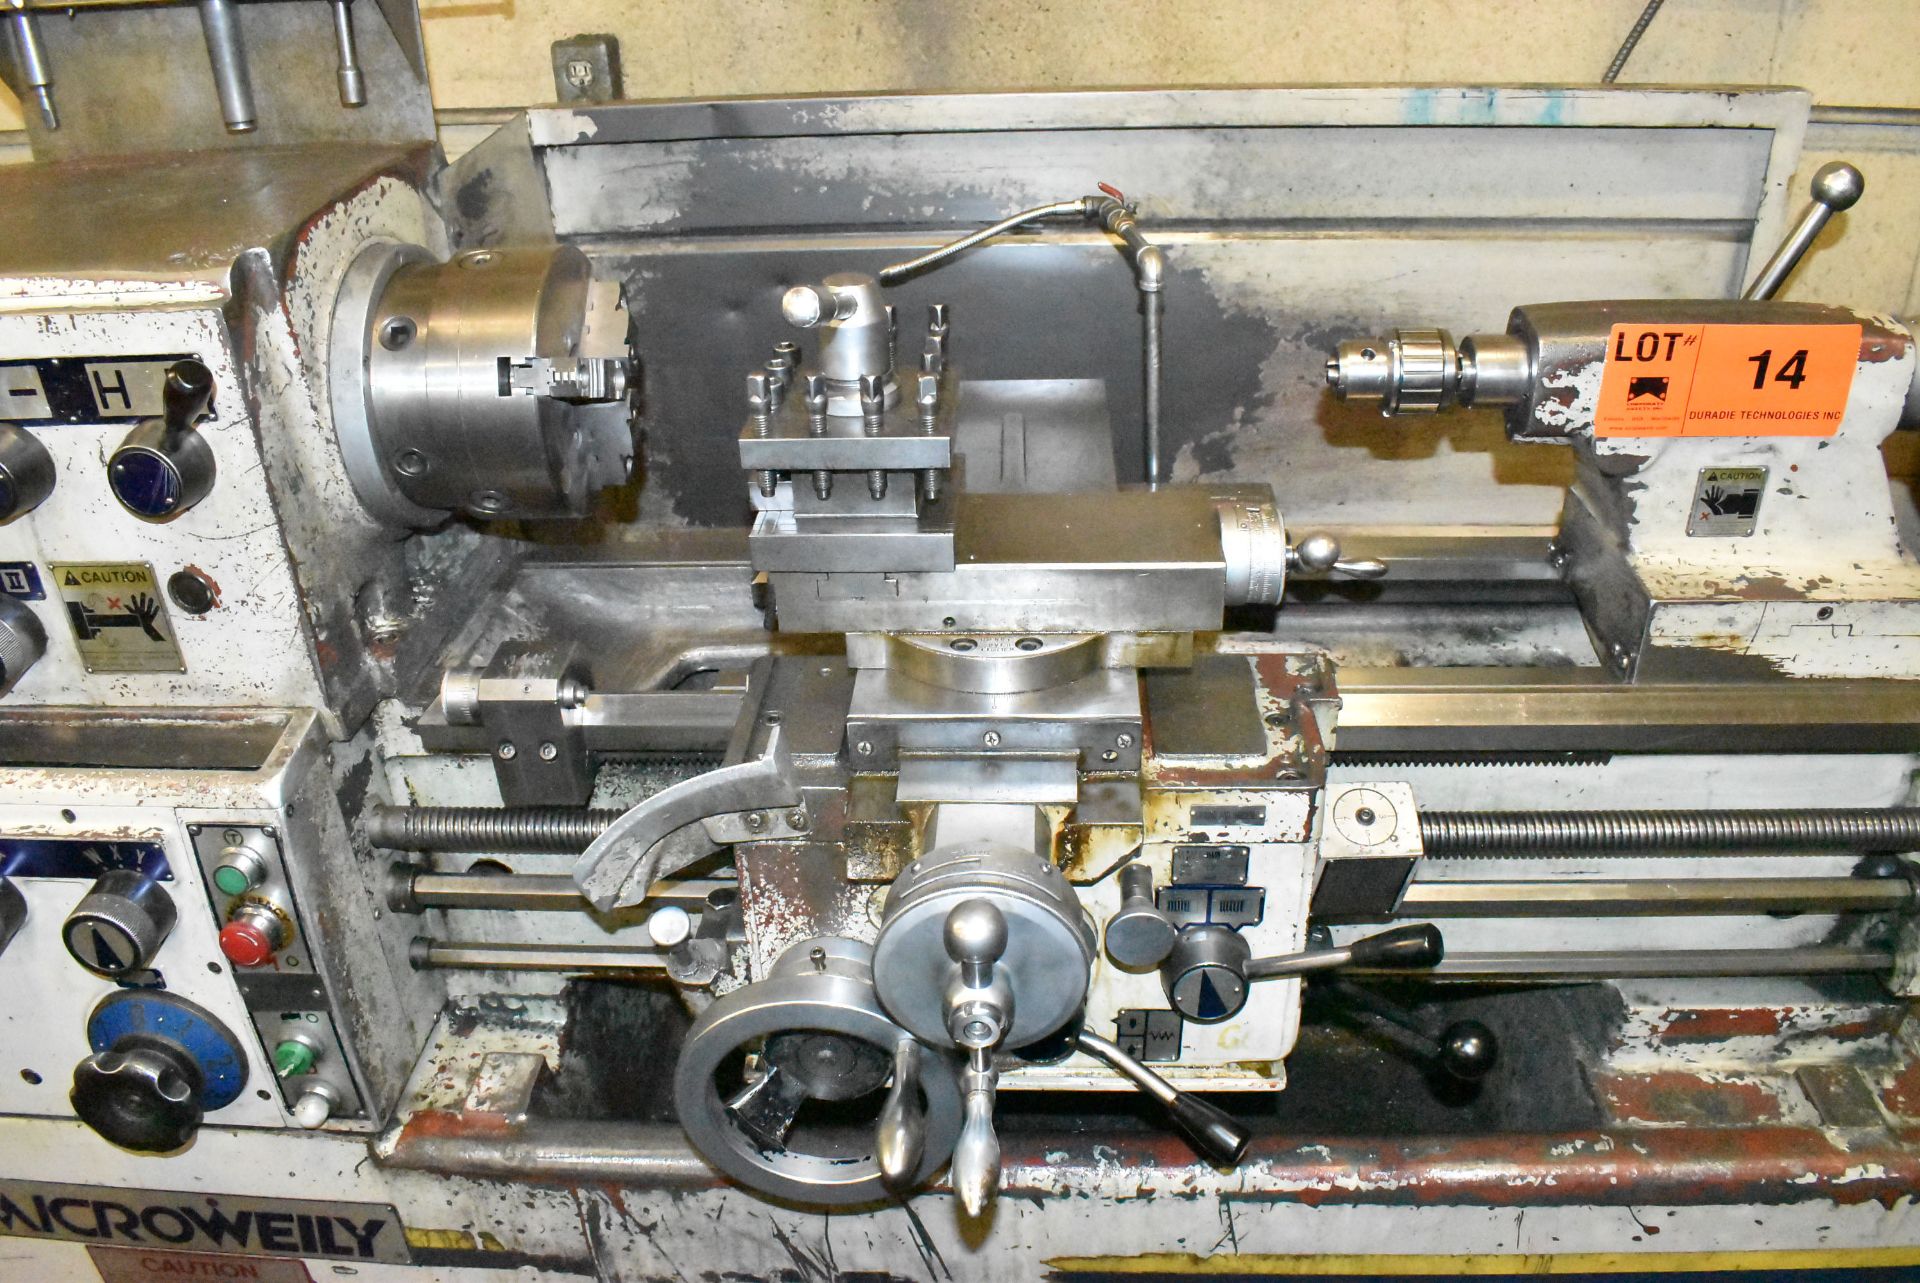 MICROWEILY (2001) TY-1630S ENGINE LATHE WITH 8" 3 JAW CHUCK 16" SWING OVER BED, 30" BETWEEN CENTERS, - Image 3 of 8